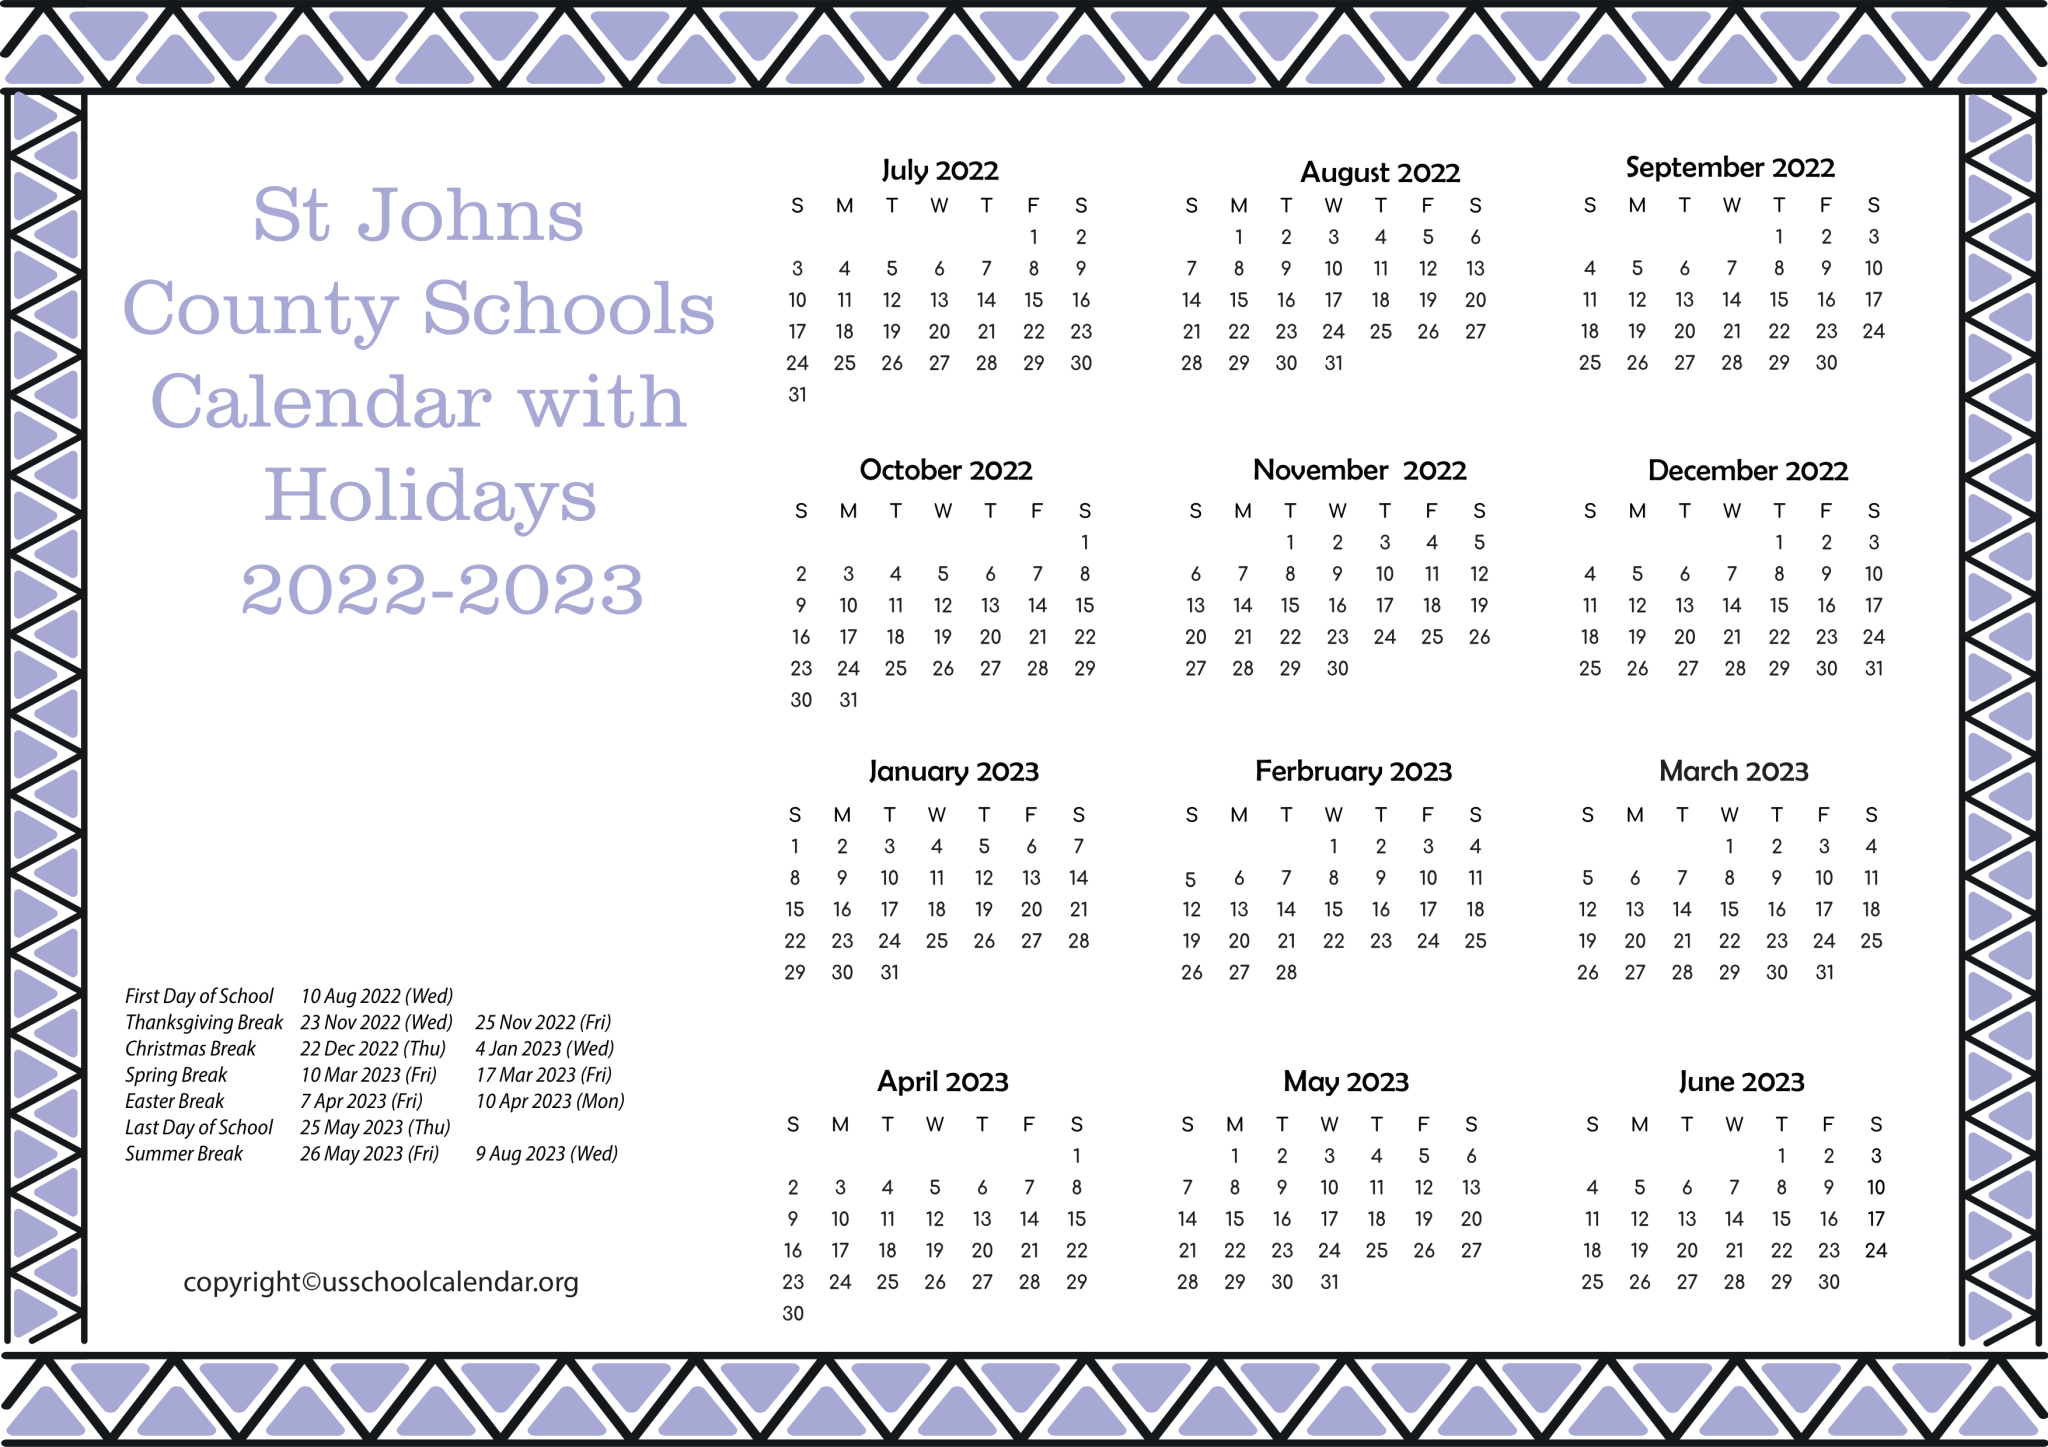 st-johns-county-schools-calendar-with-holidays-2022-2023